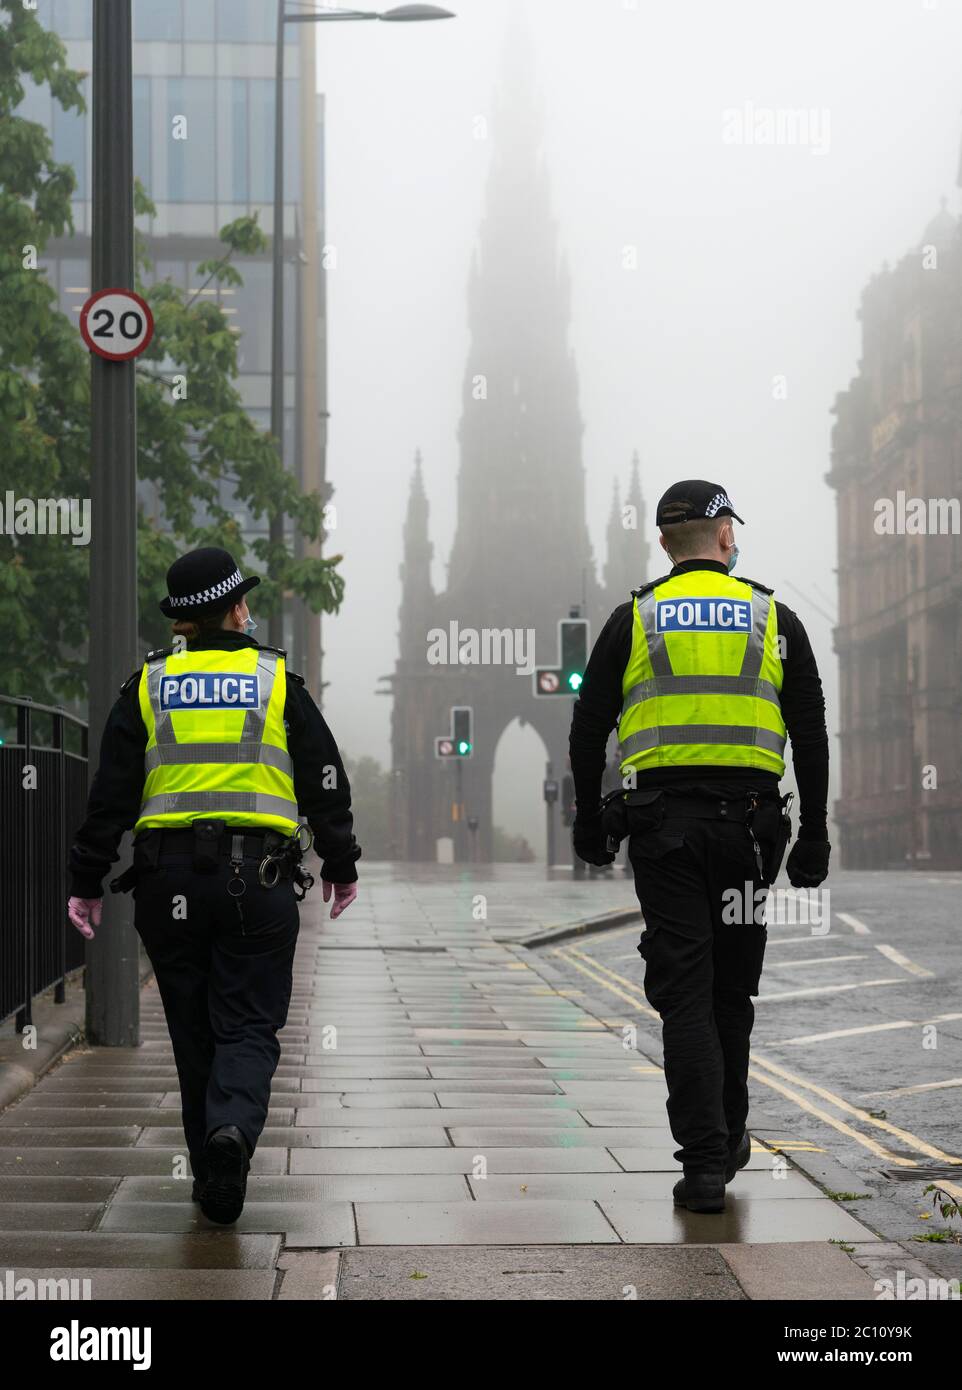 Edinburgh, Scotland, UK. 13 June 2020. Police patrol St Andrew Square on Saturday afternoon. A planned Black Lives Matter demonstration in the square seems to have attracted only a few peaceful protestors. The square is the site of the Melville Monument and statue of Henry Dundas, Protestors want the statue removed. Iain Masterton/Alamy Live News Stock Photo